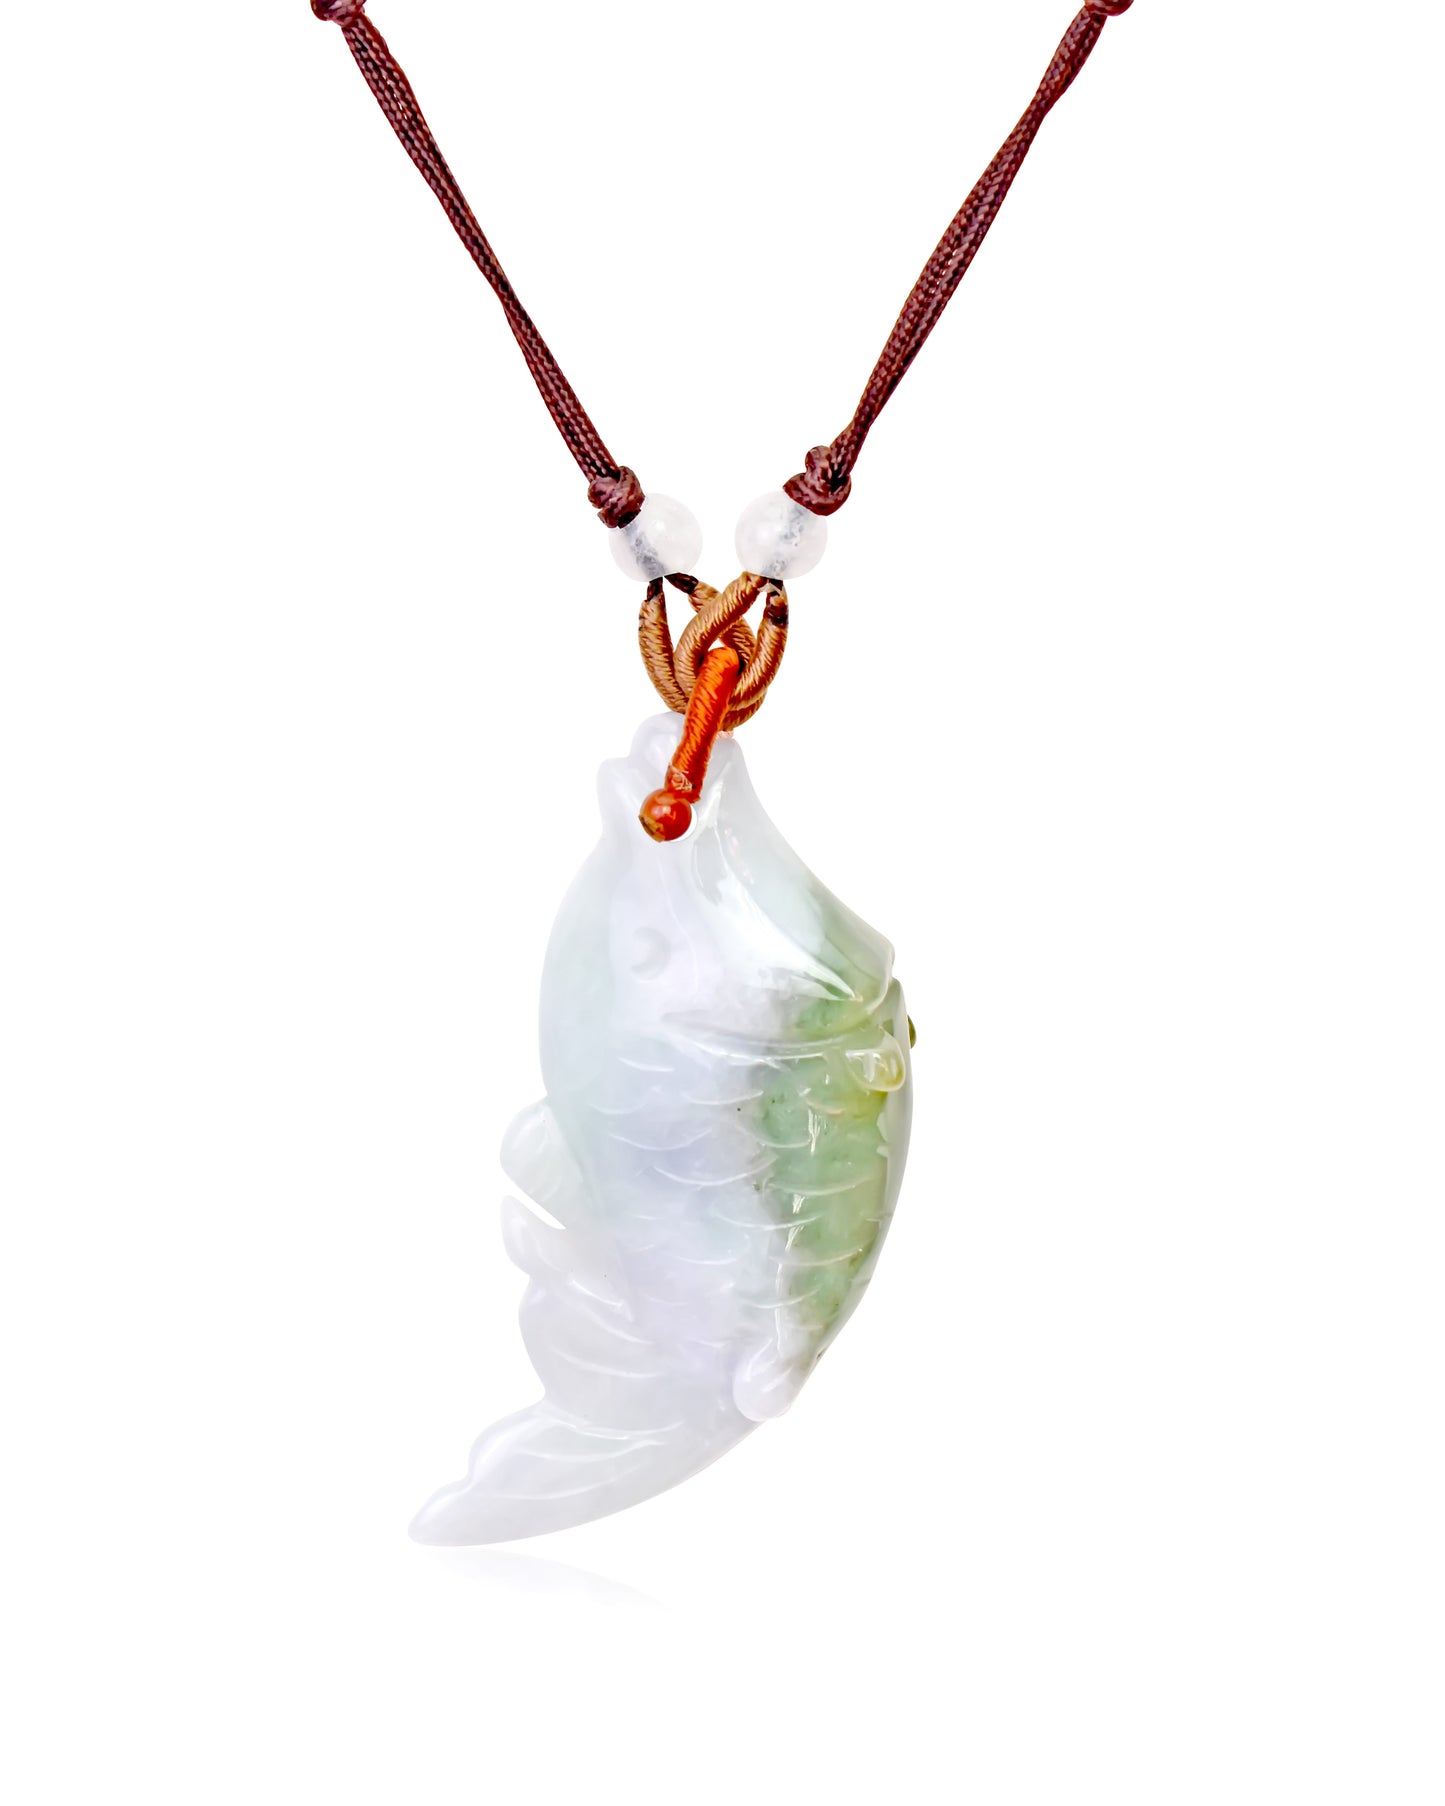 Attract Wealth and Abundance with a Koi Fish Necklace